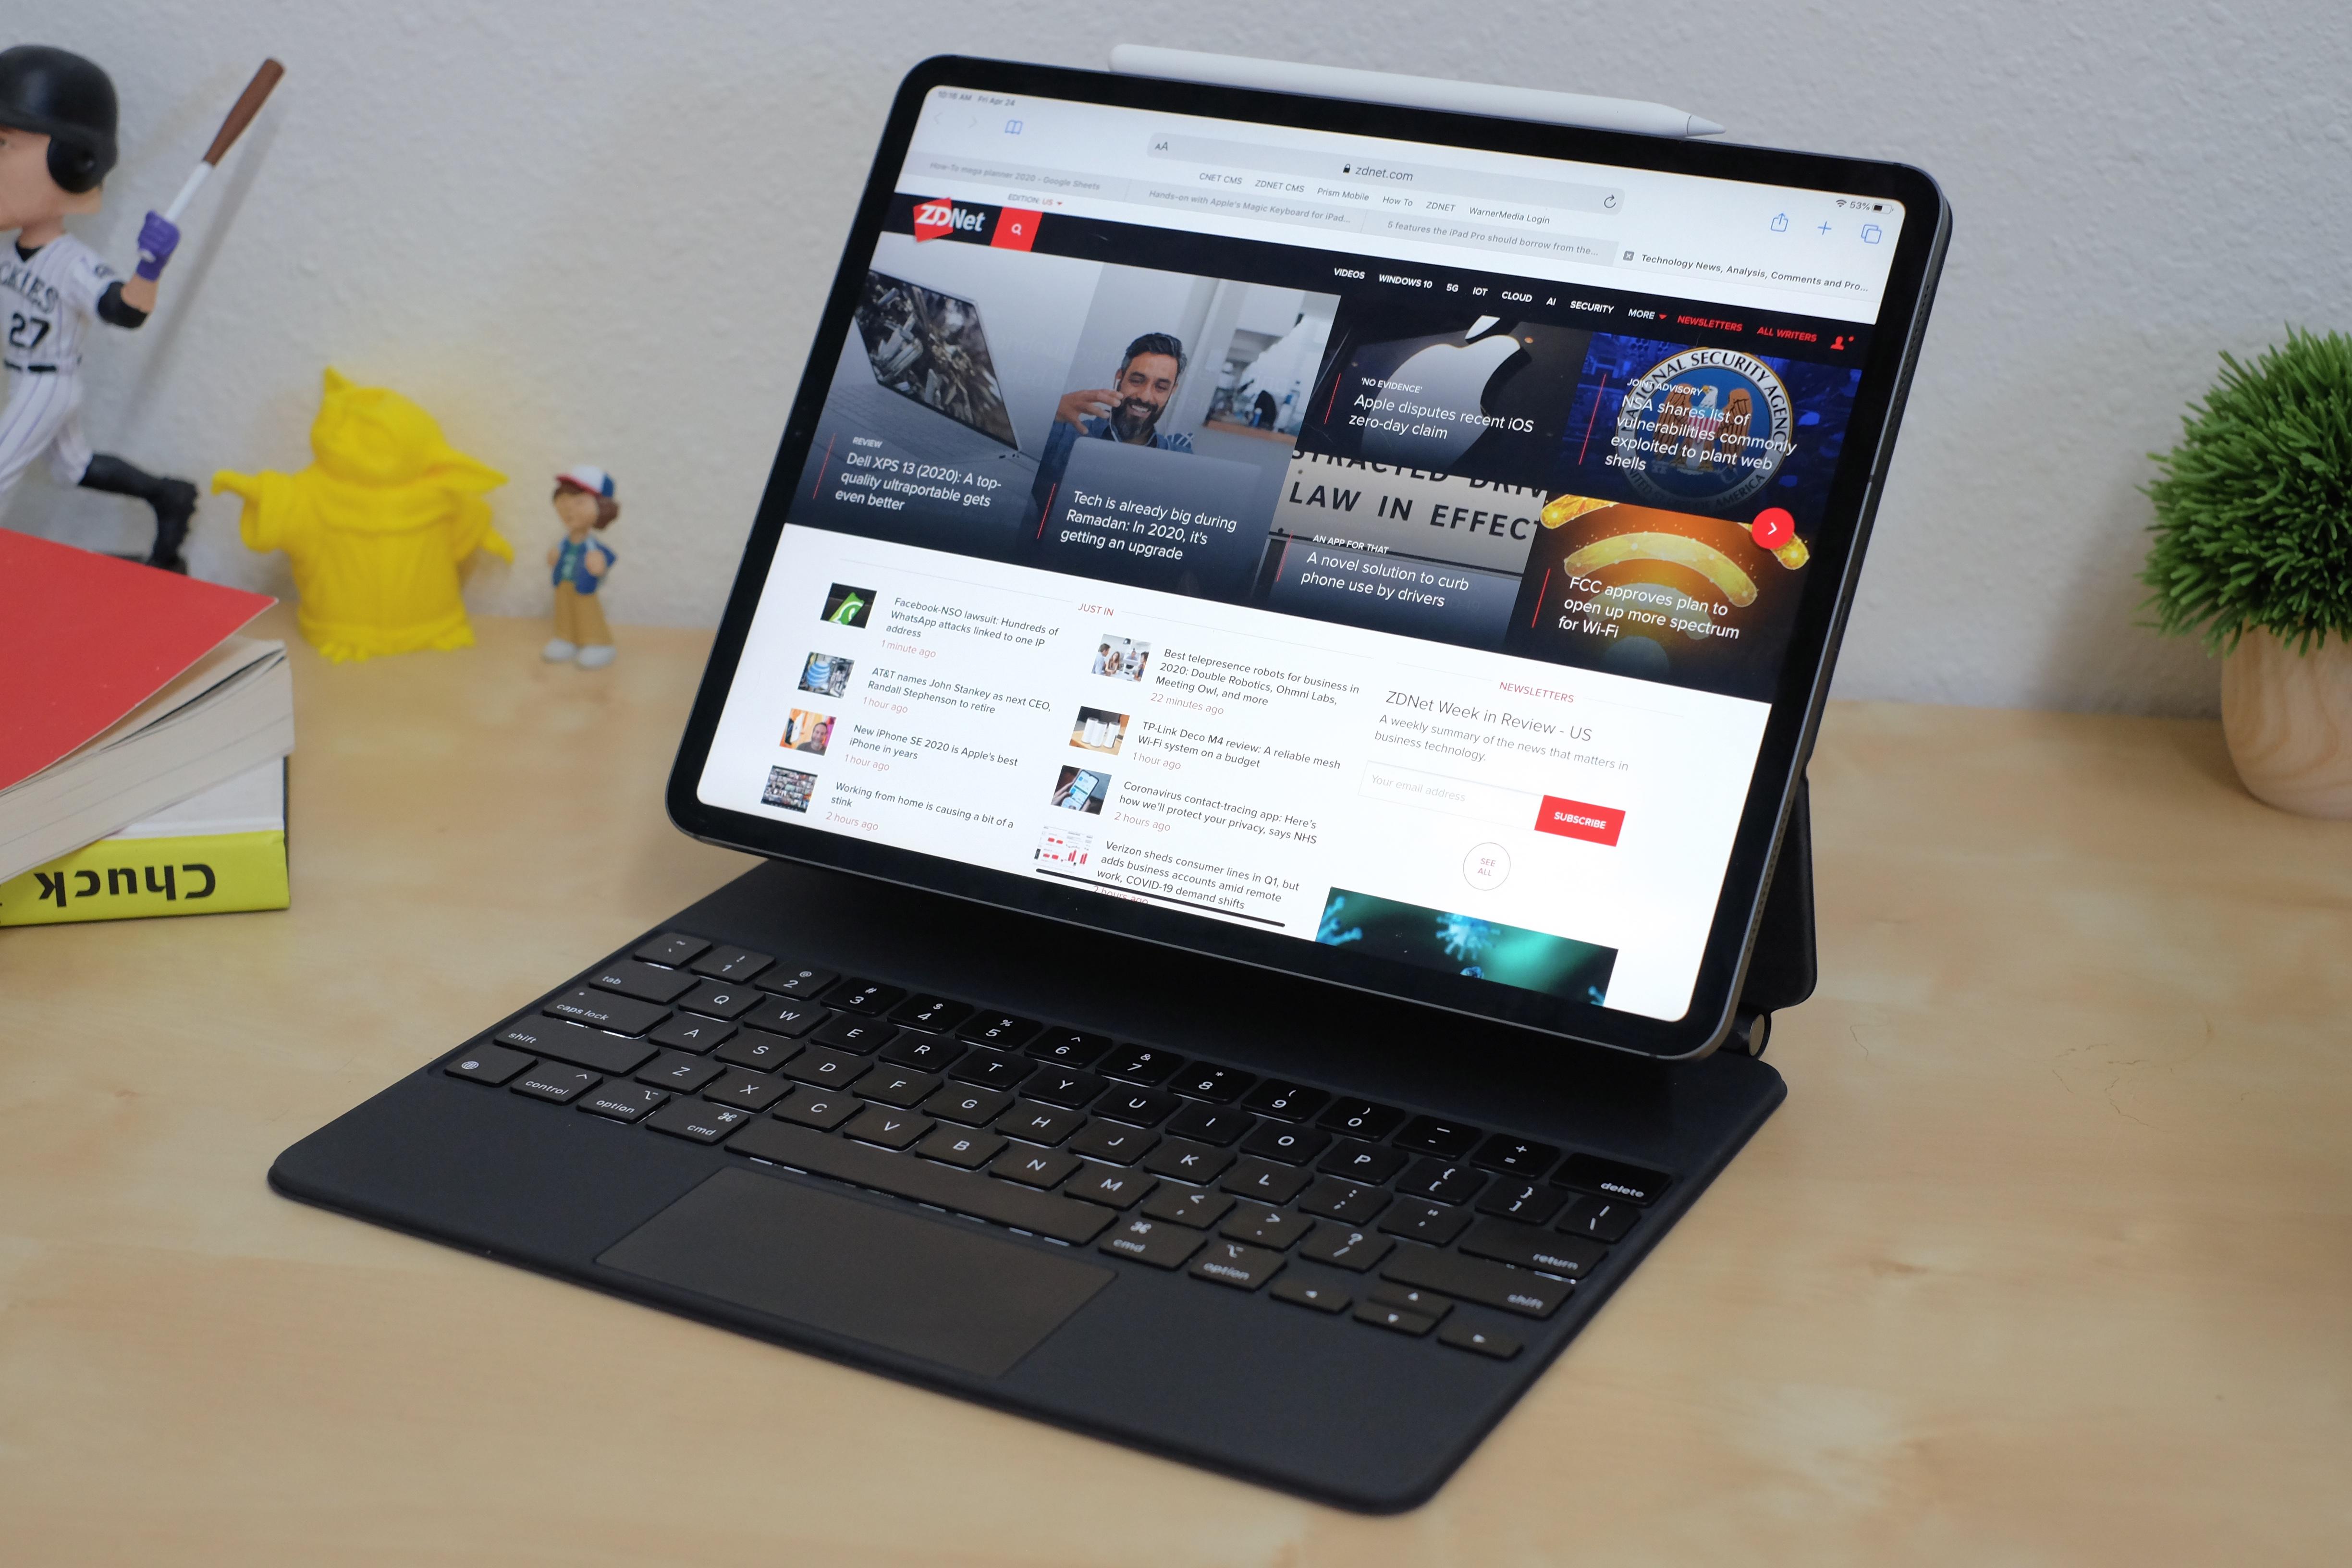 iPad Pro 12.9 review: More like iPad Business Casual